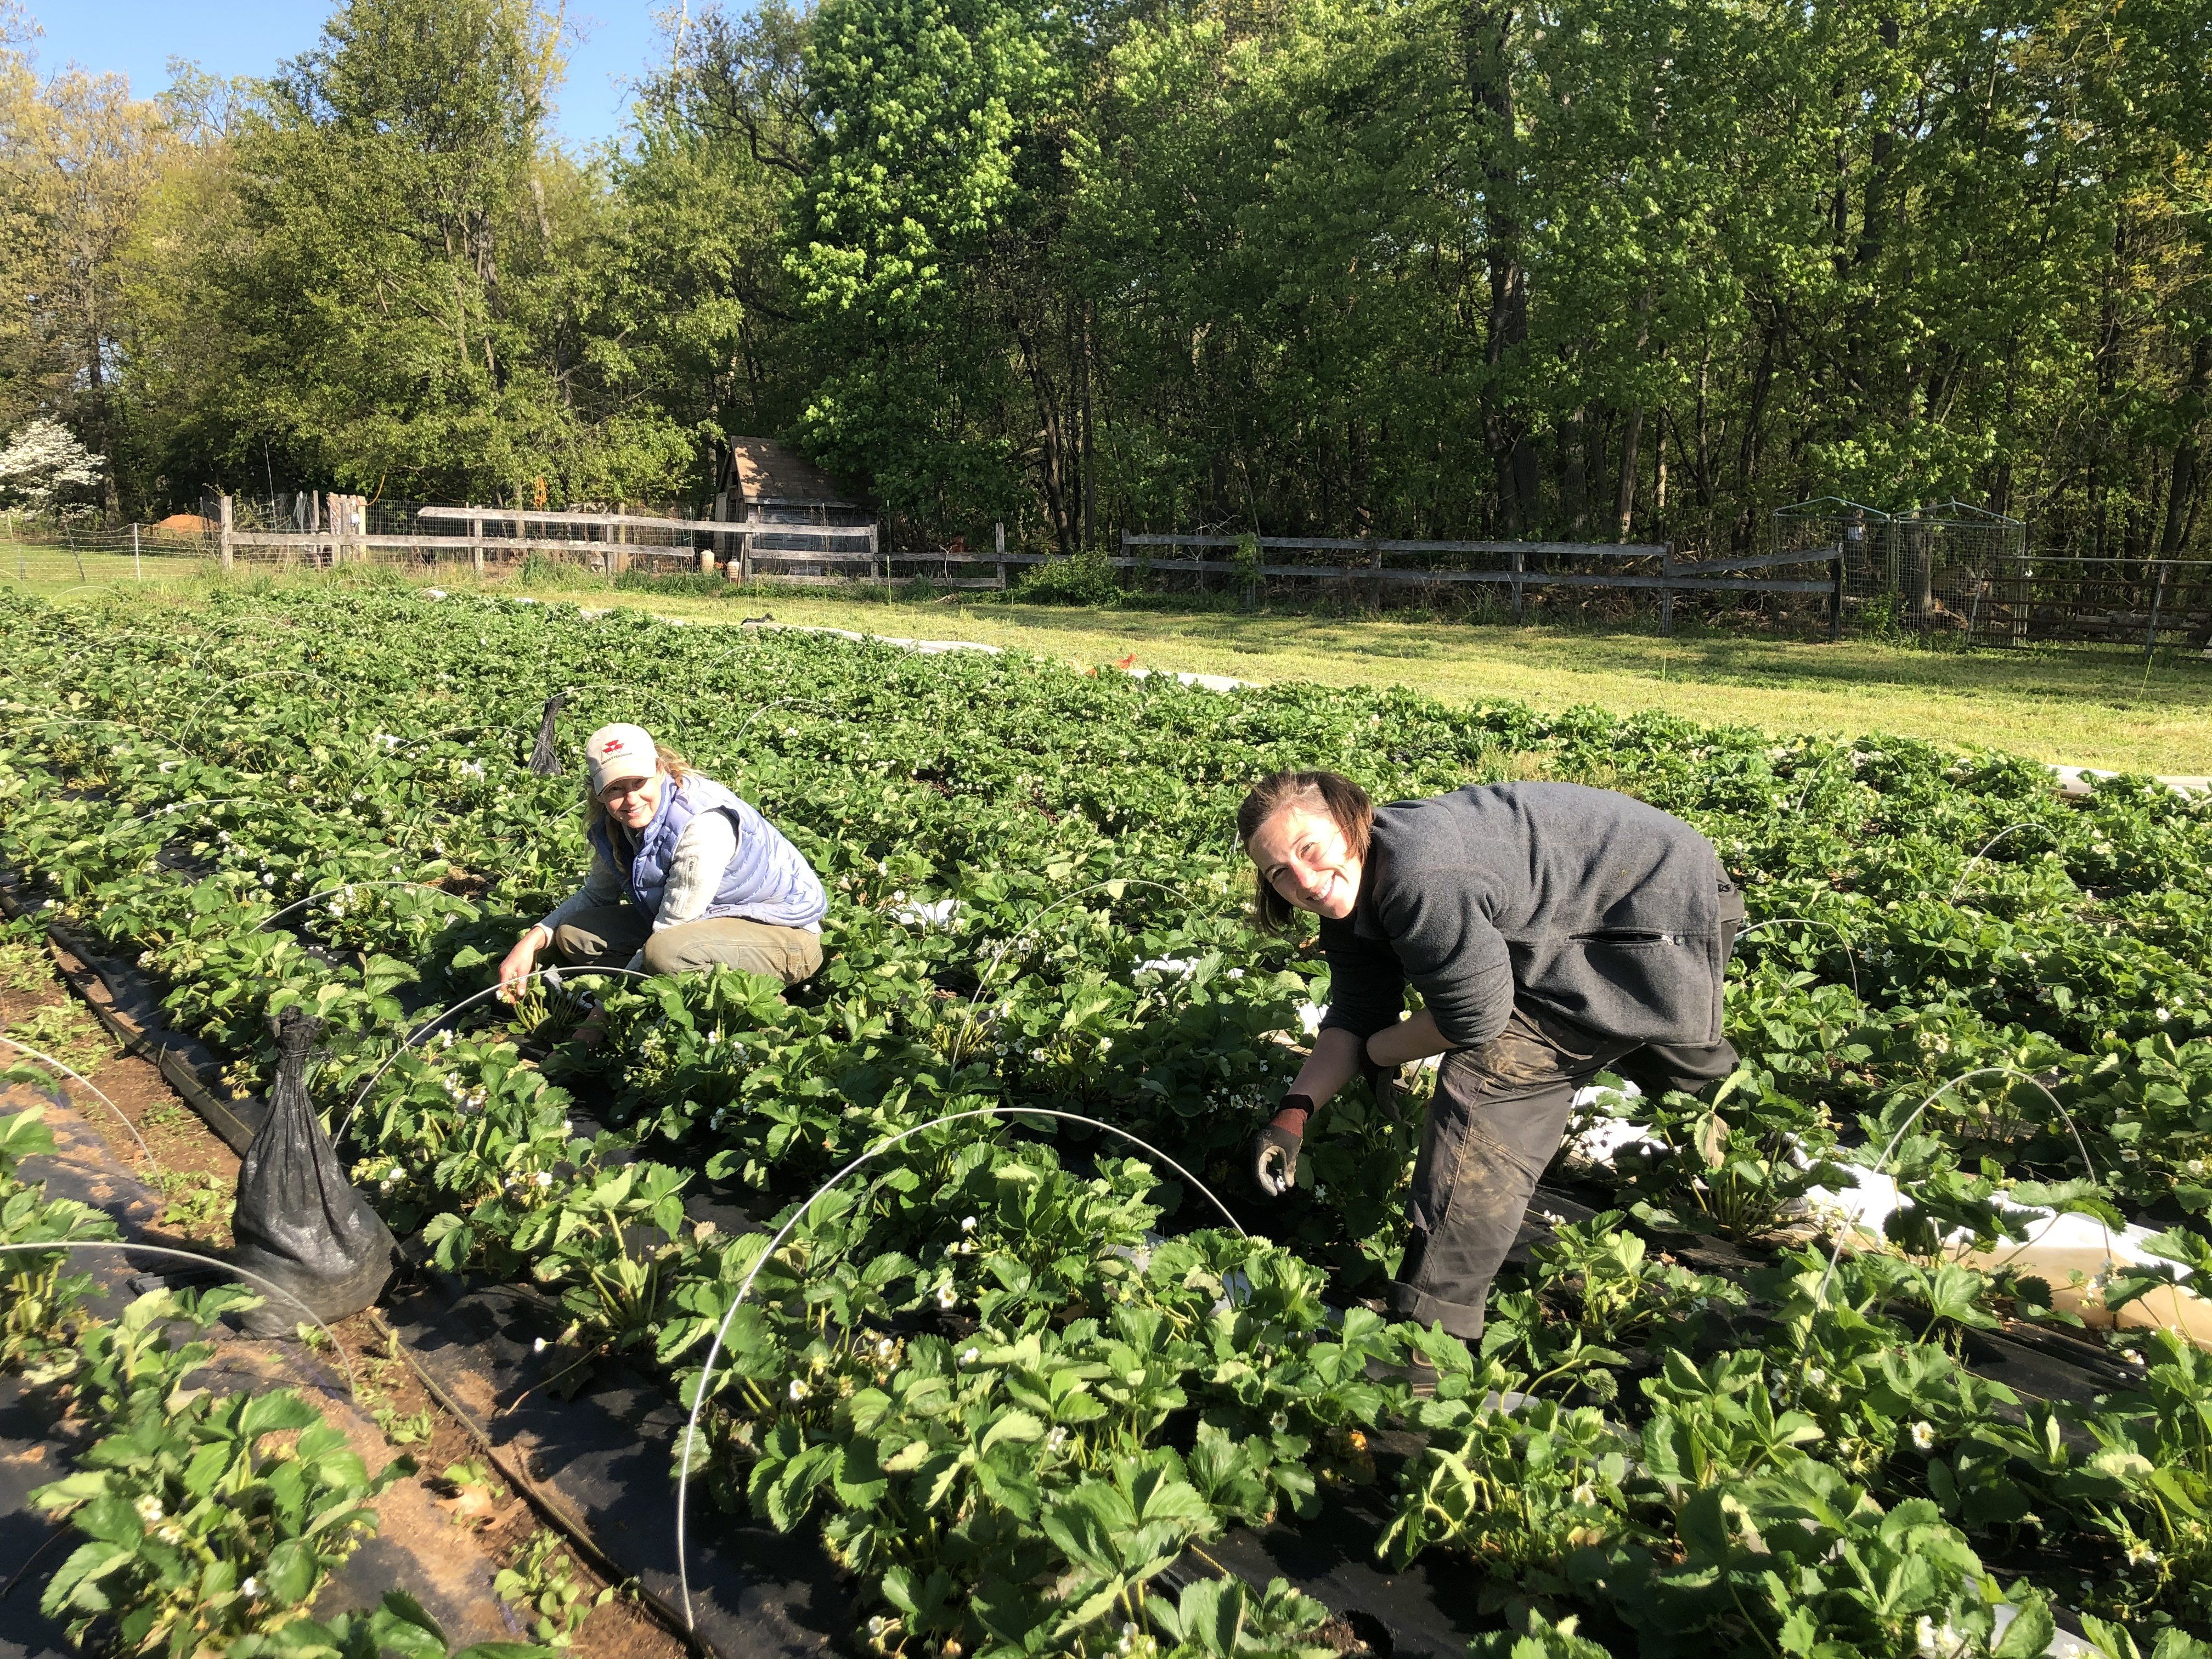 Previous Happening: Farm Happenings for May 19, 2020